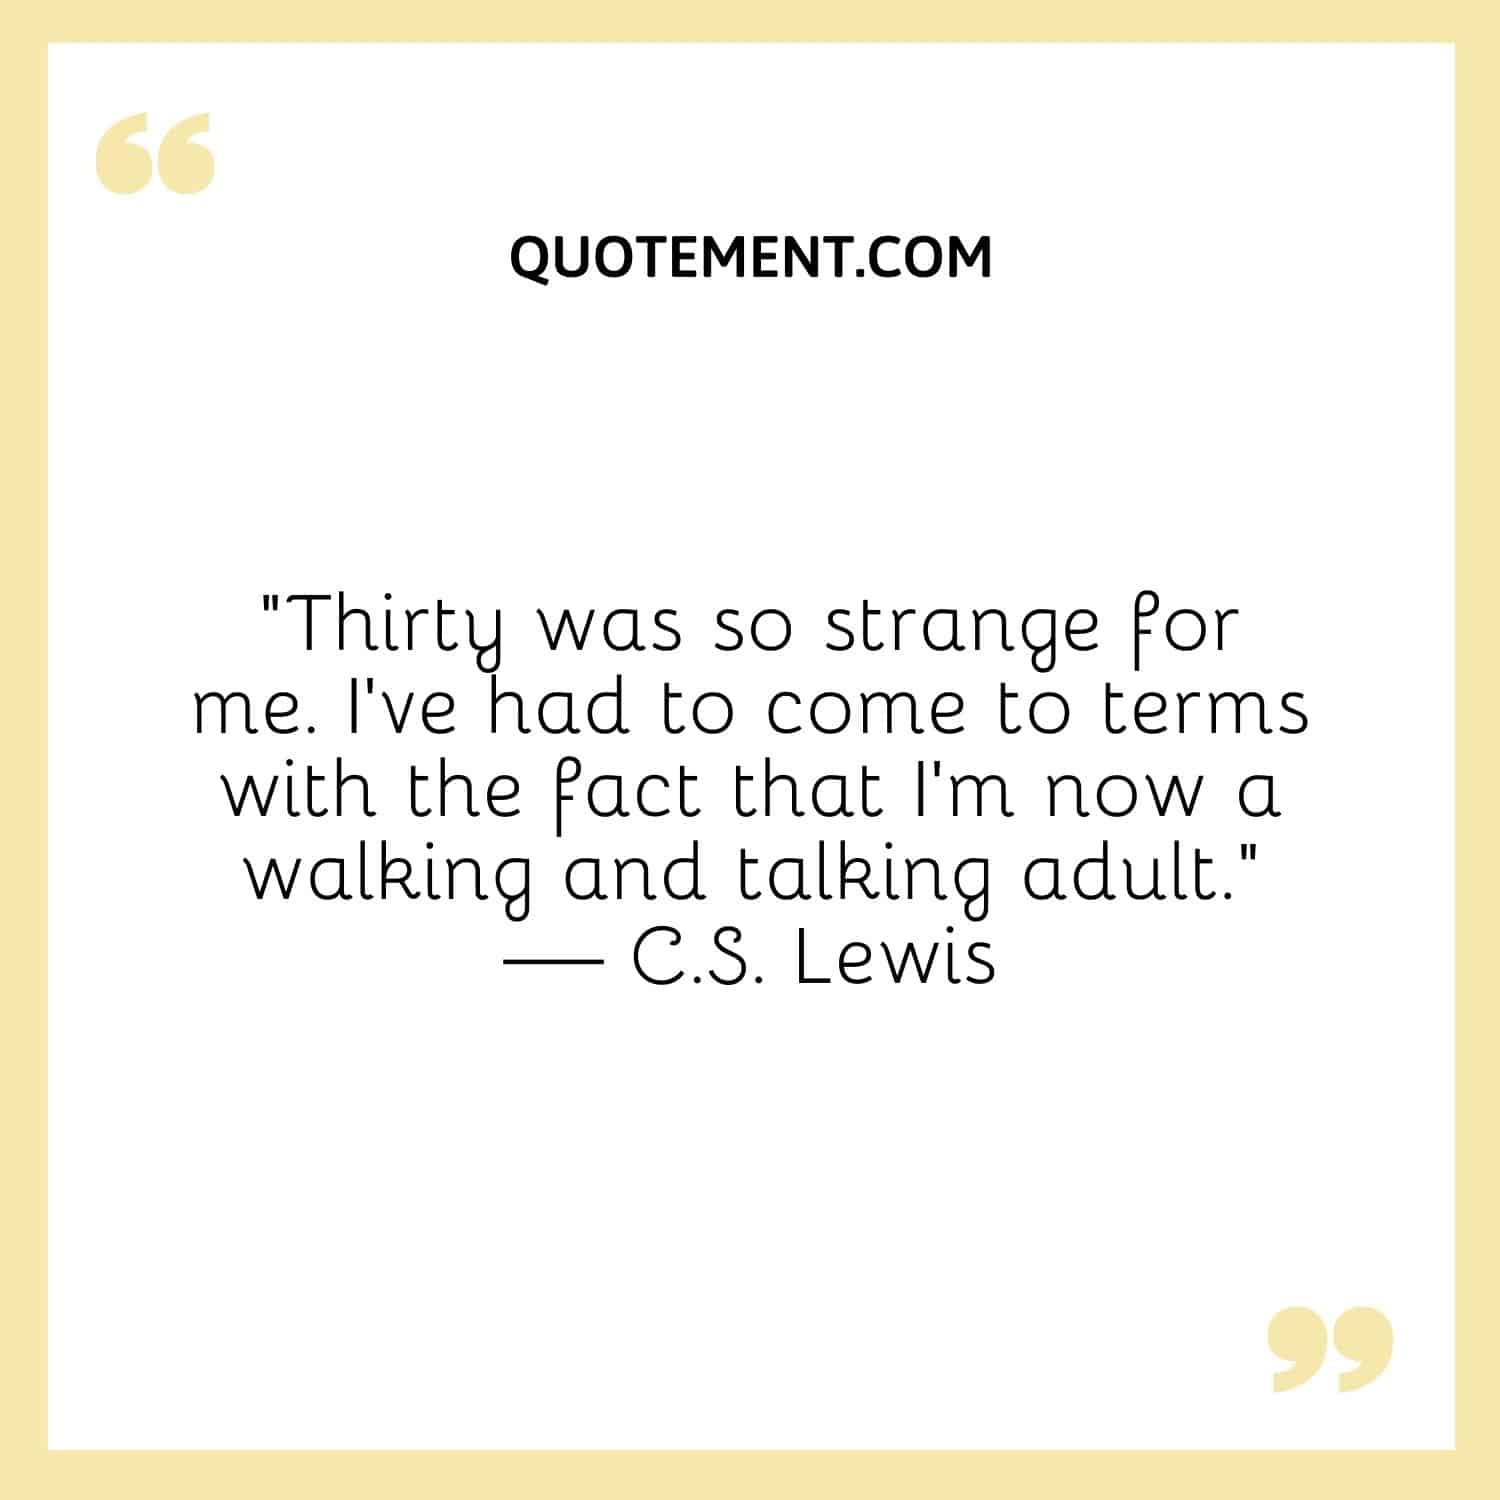 “Thirty was so strange for me. I’ve had to come to terms with the fact that I’m now a walking and talking adult.” — C.S. Lewis